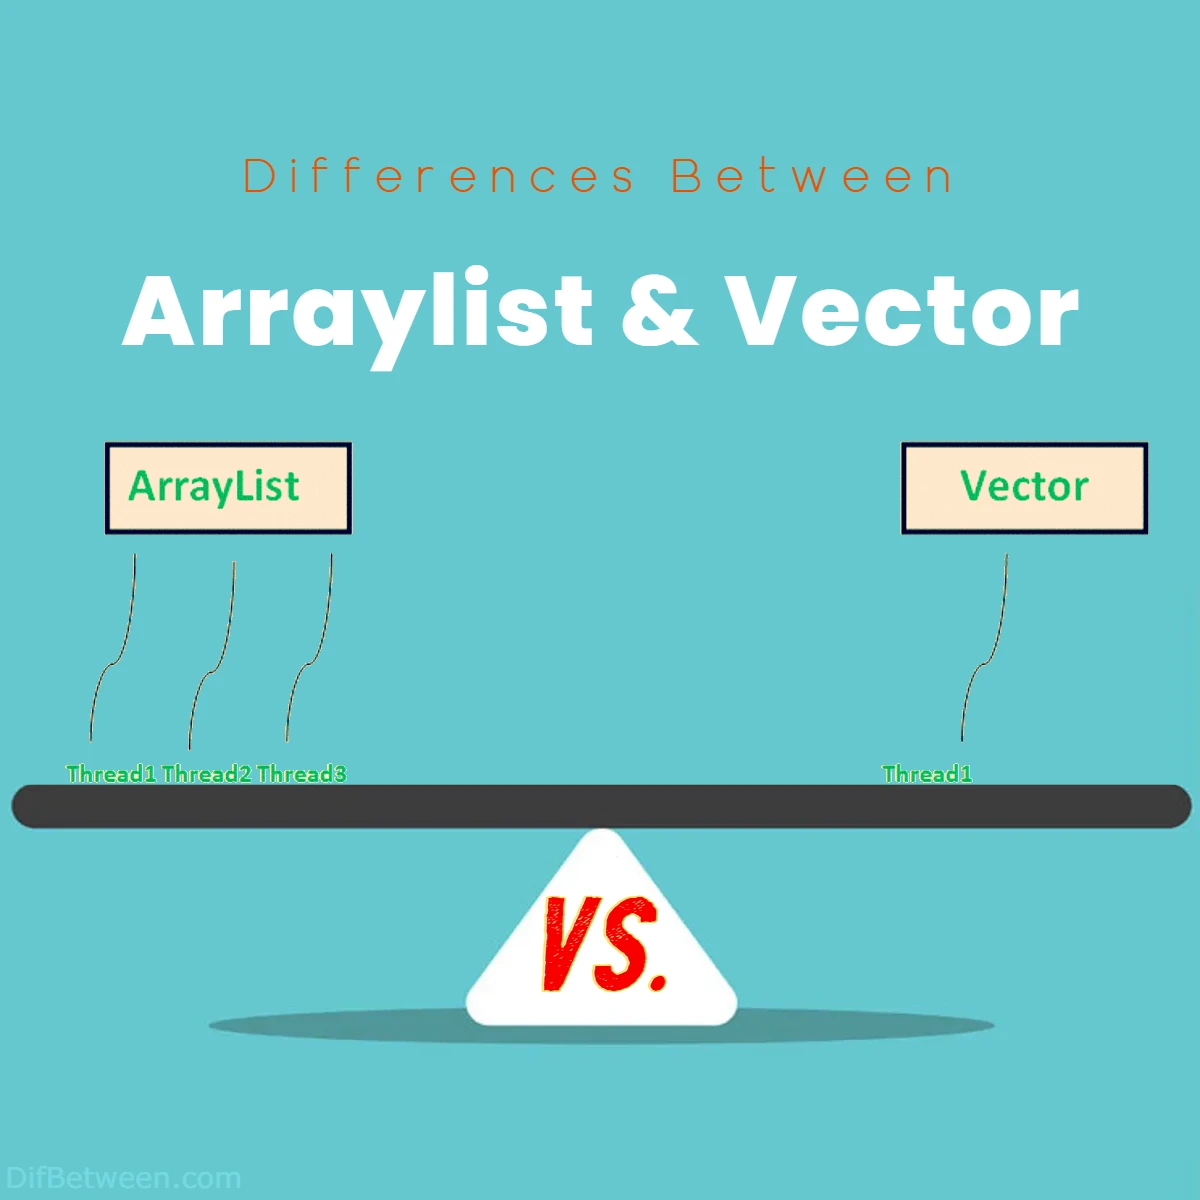 Differences Between Arraylist and Vector